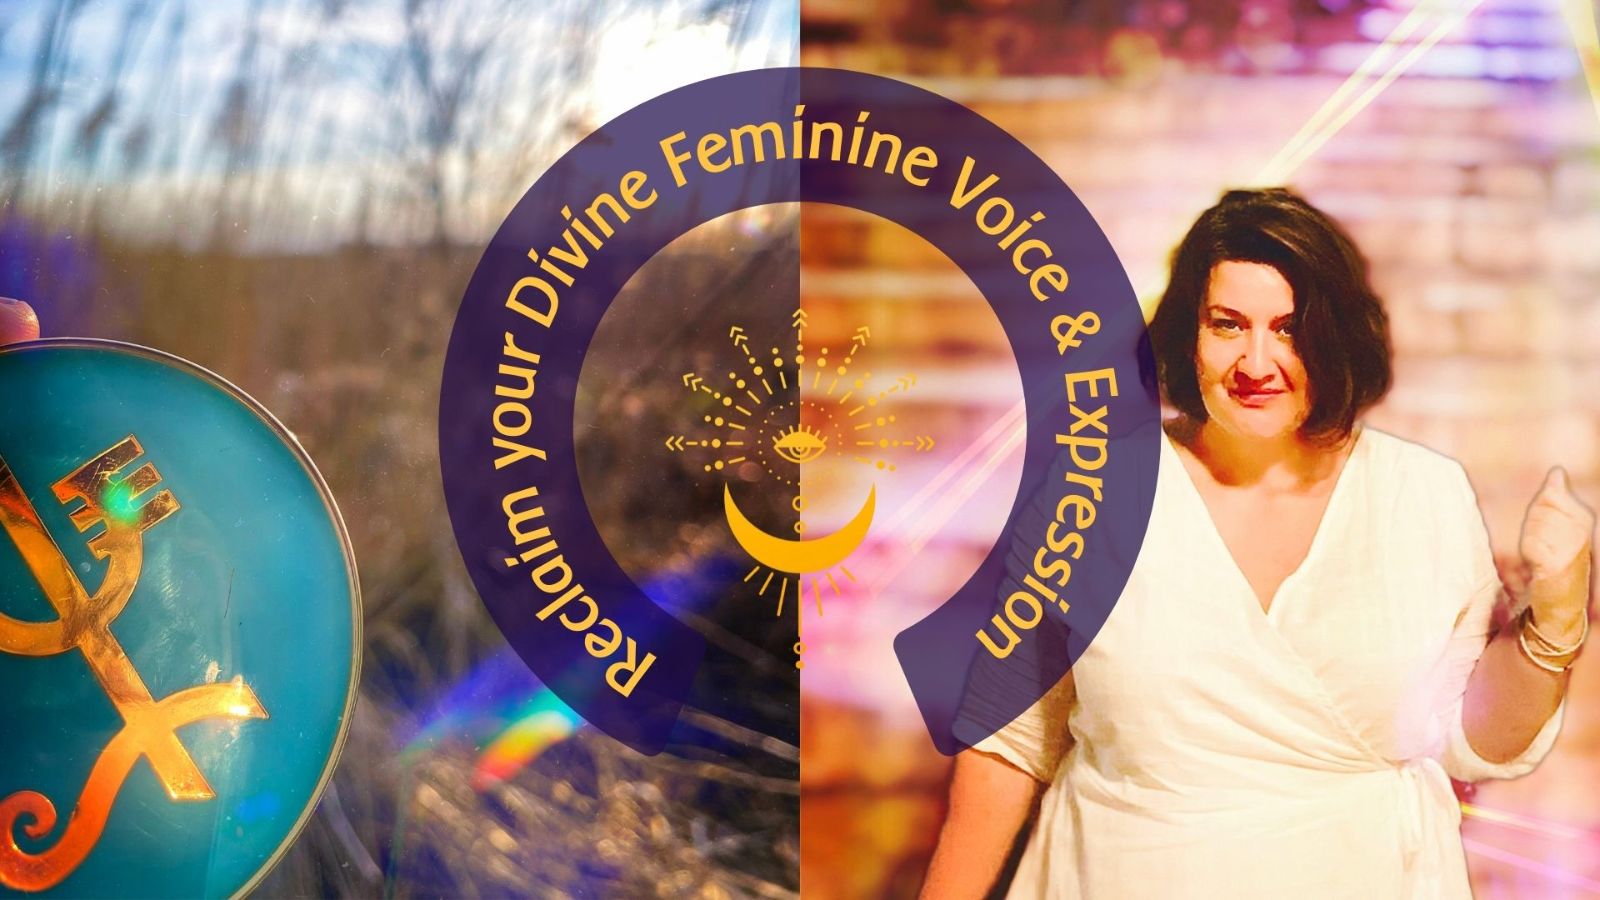 RE-CLAIM YOUR DIVINE FEMININE VOICE AND SELF-EXPRESSION -special price for DP-members